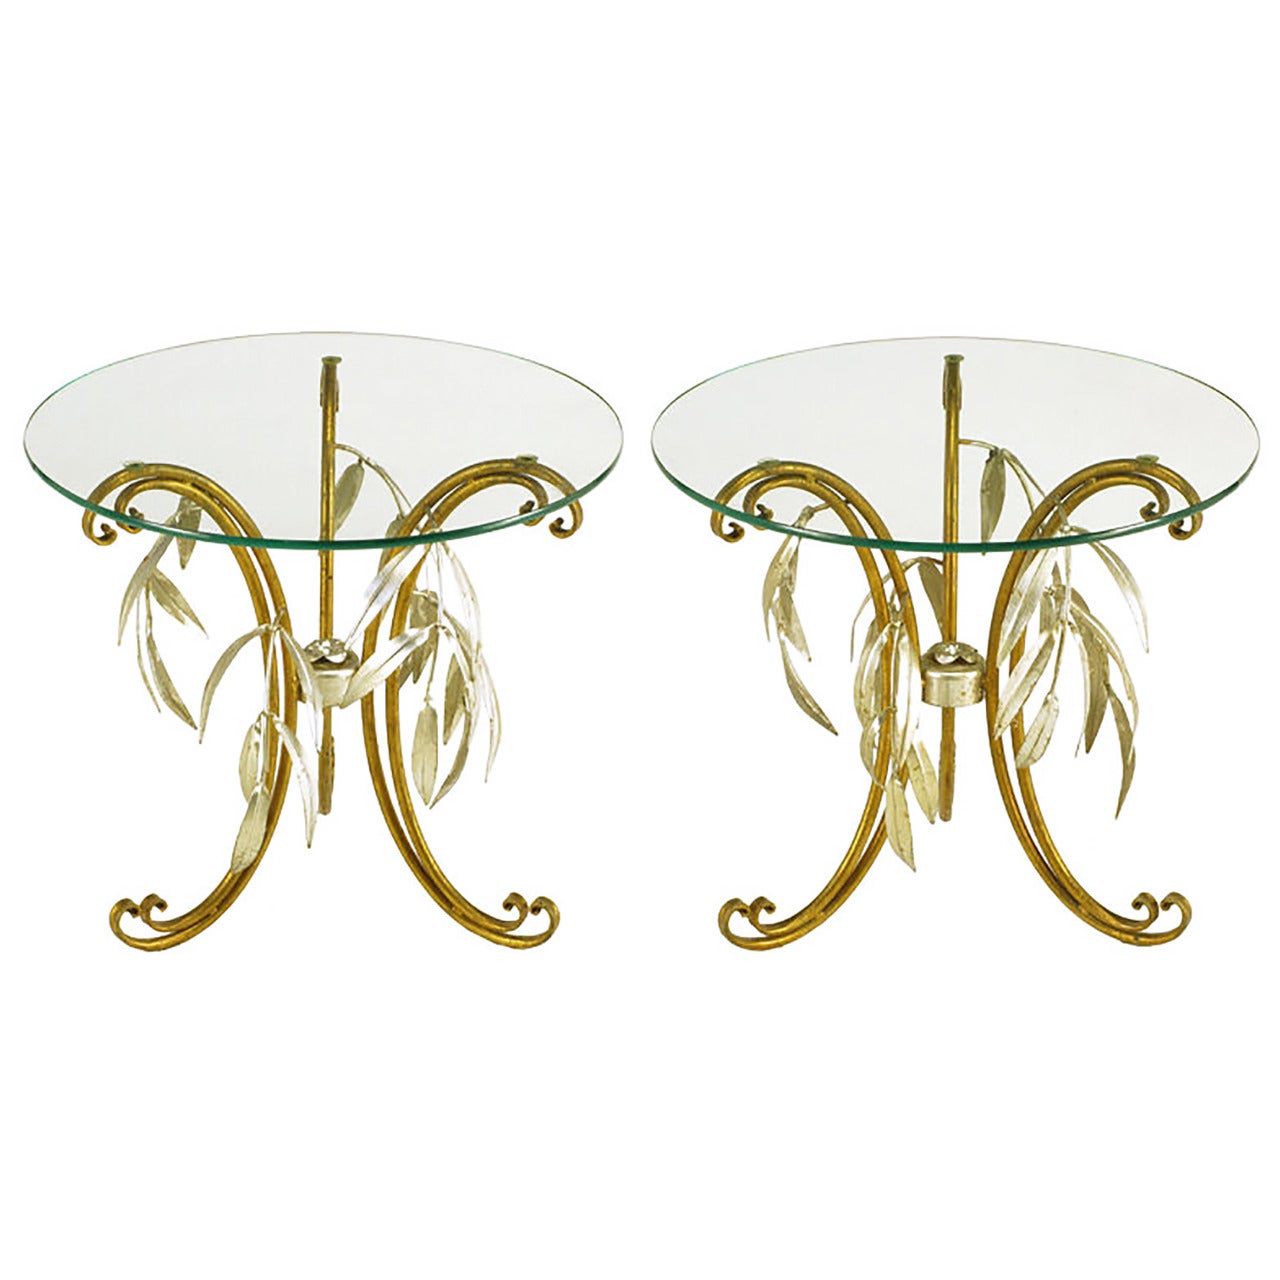 Pair of Italian Tole Metal and Silver Leaf Foliate End Tables